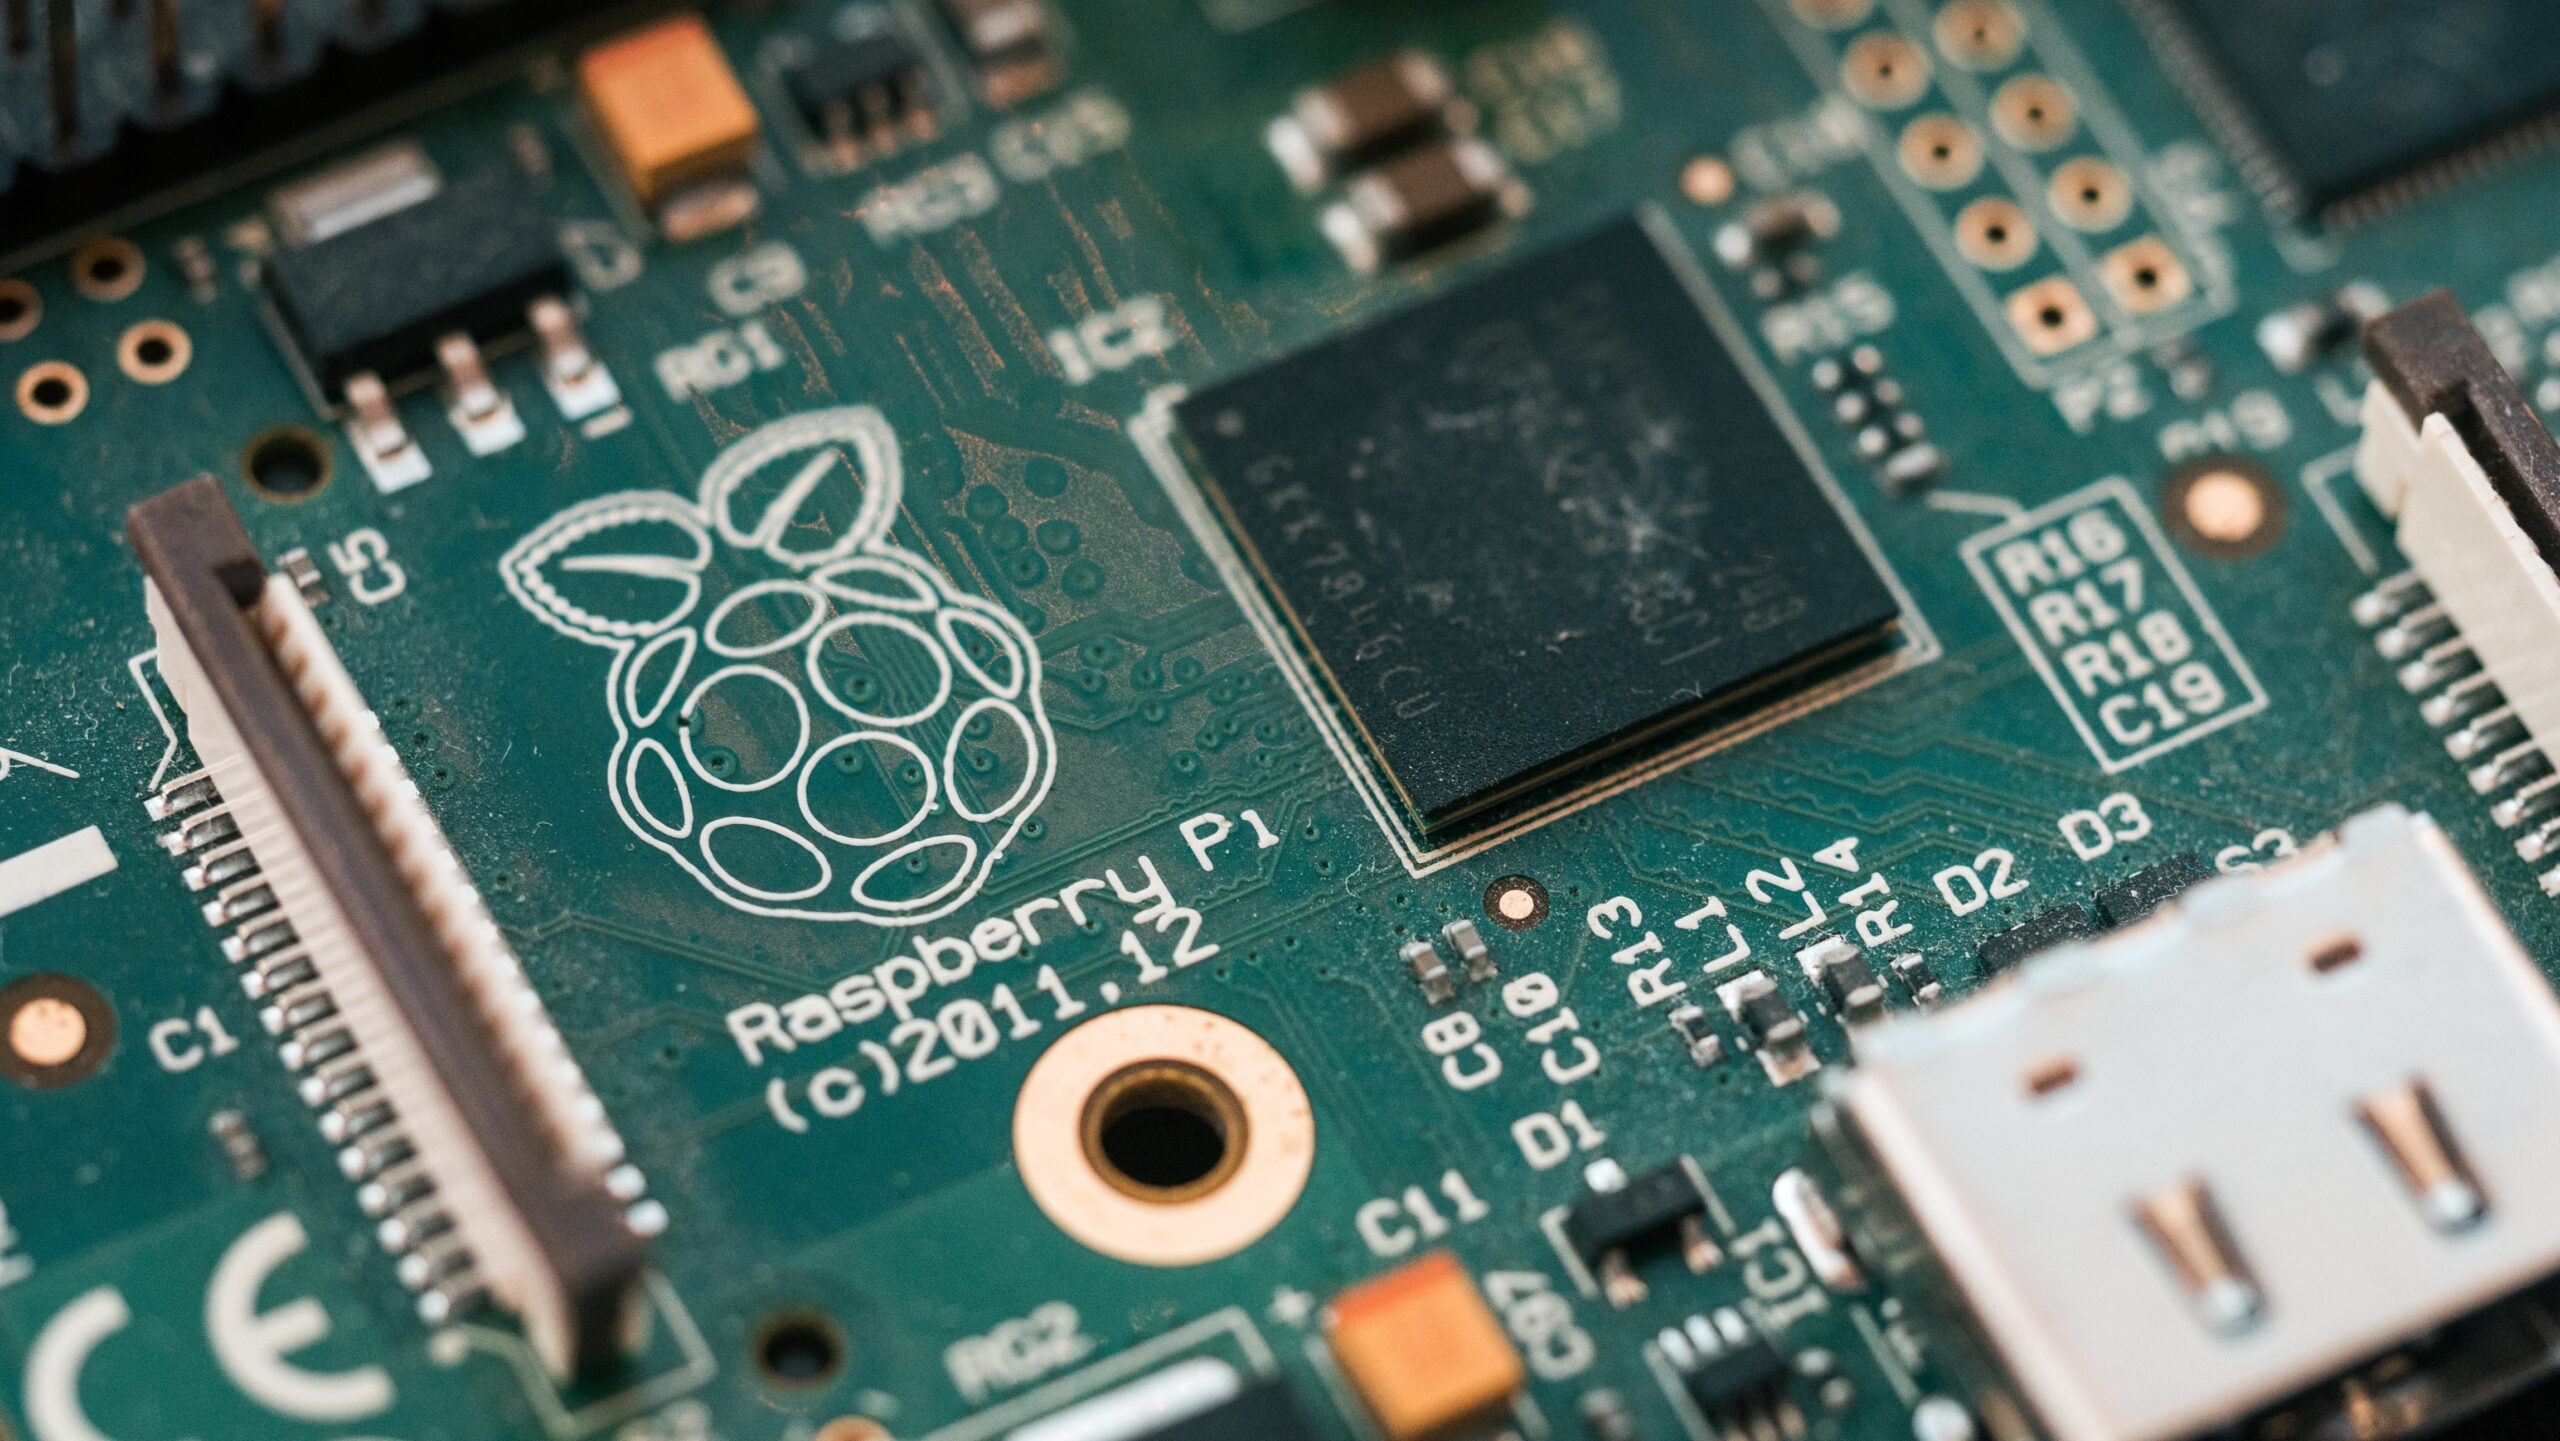 Raspberry Pi interfacing with Labview